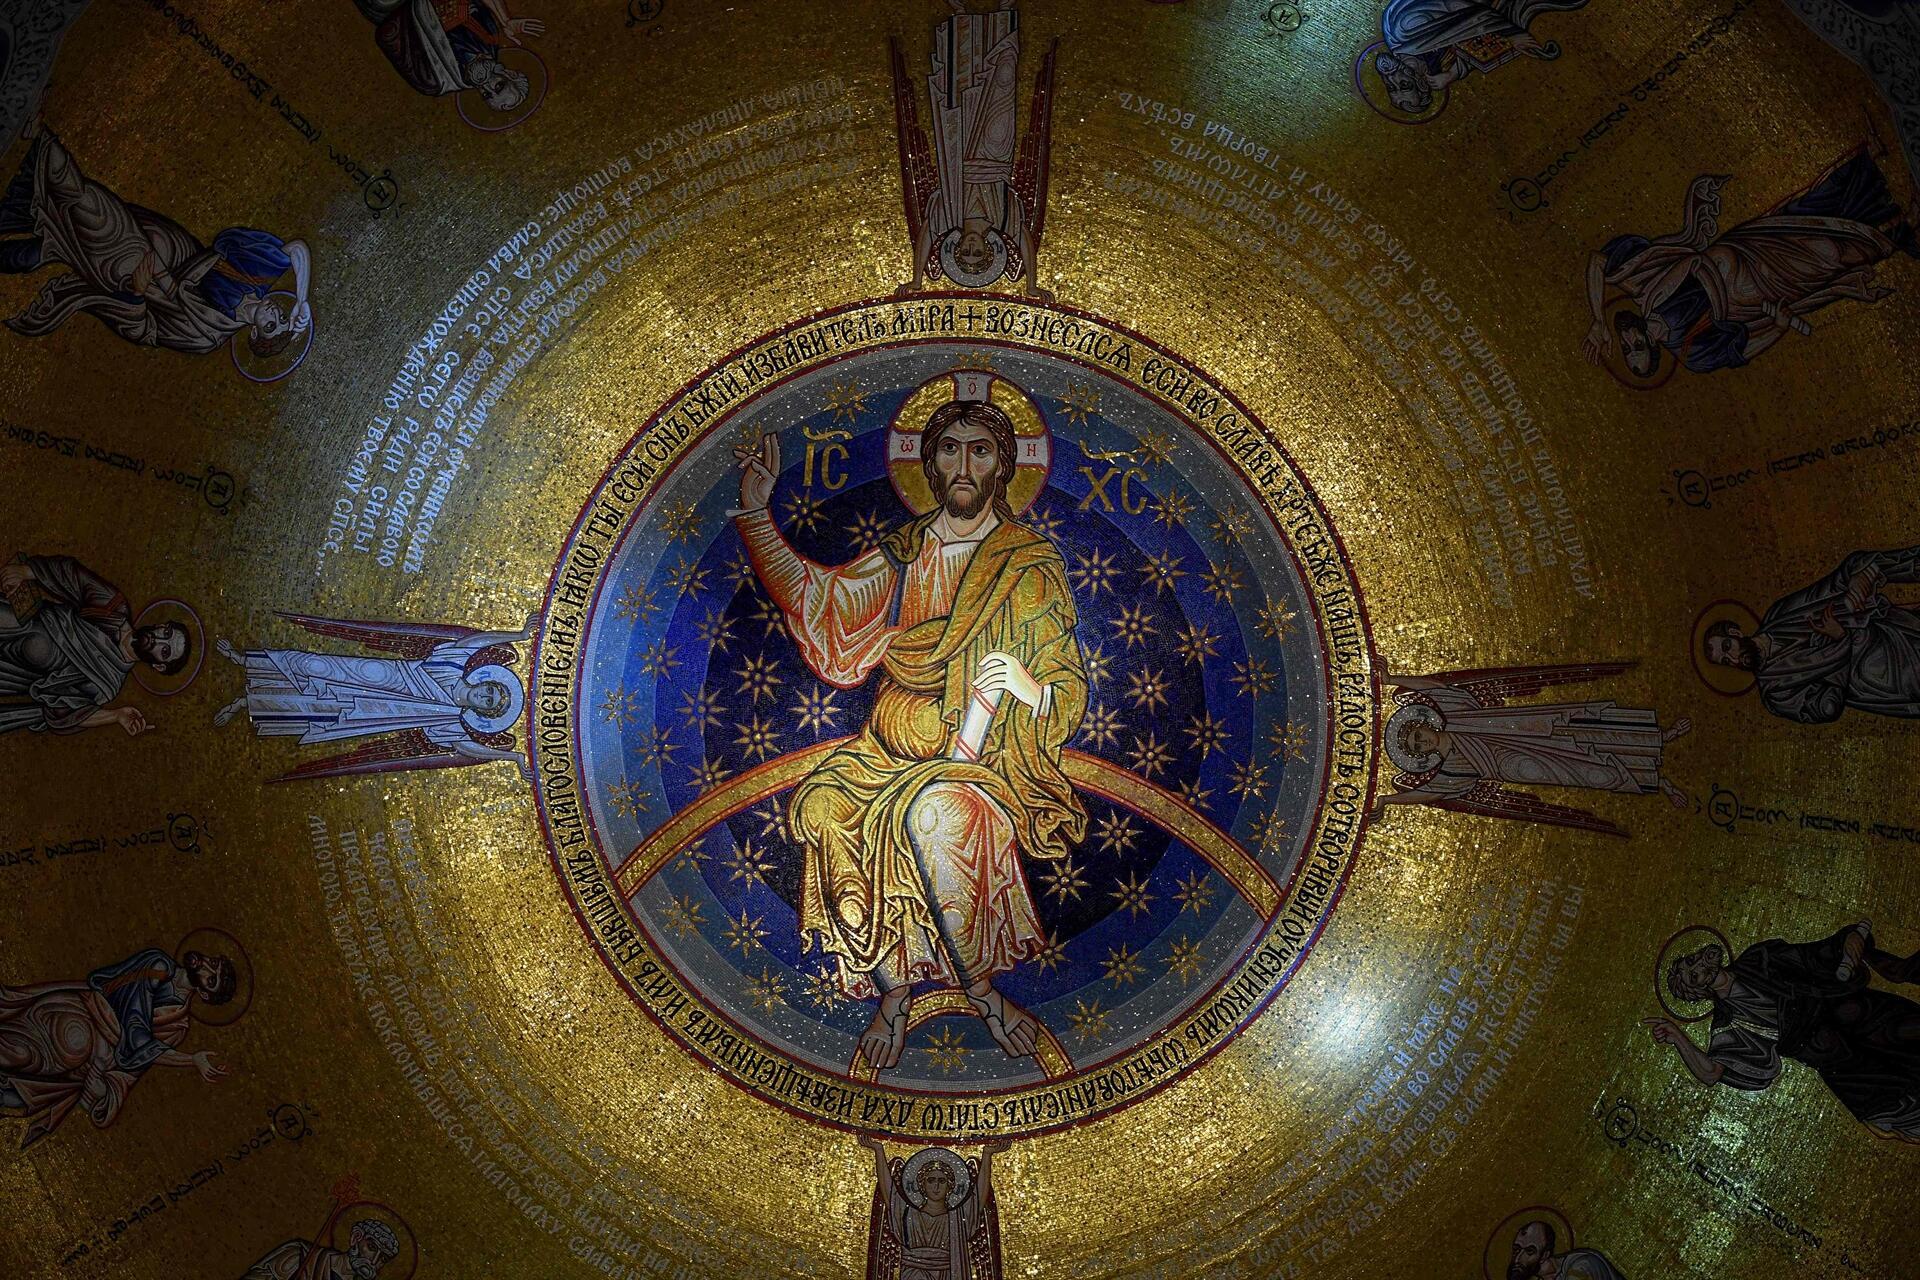 Giant mosaic unveiled in worlds second largest Orthodox church